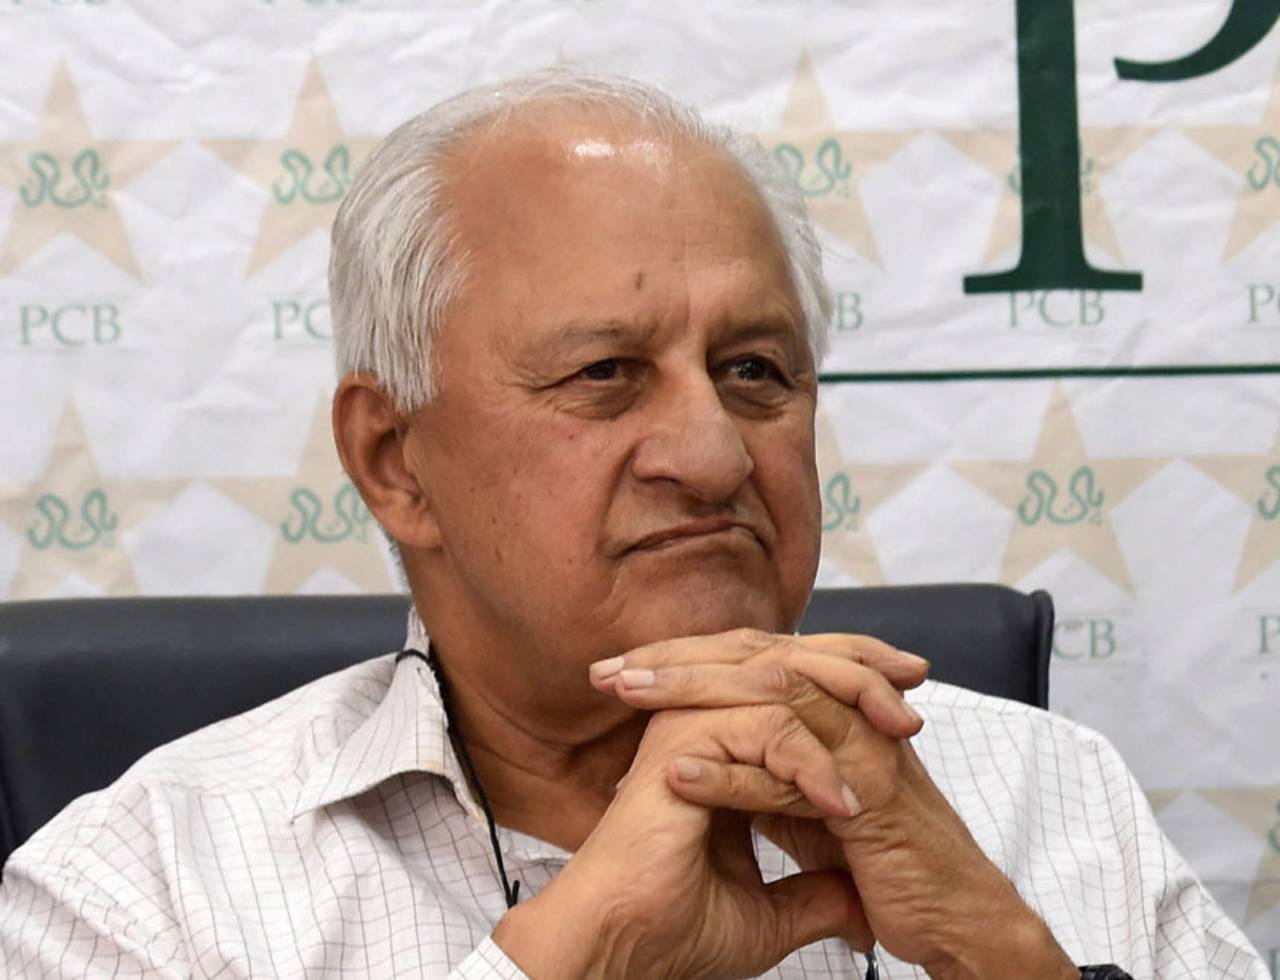 The PCB has been grappling between solving its internal issues and strengthening domestic cricket along with monitoring corruption&nbsp;&nbsp;&bull;&nbsp;&nbsp;AFP